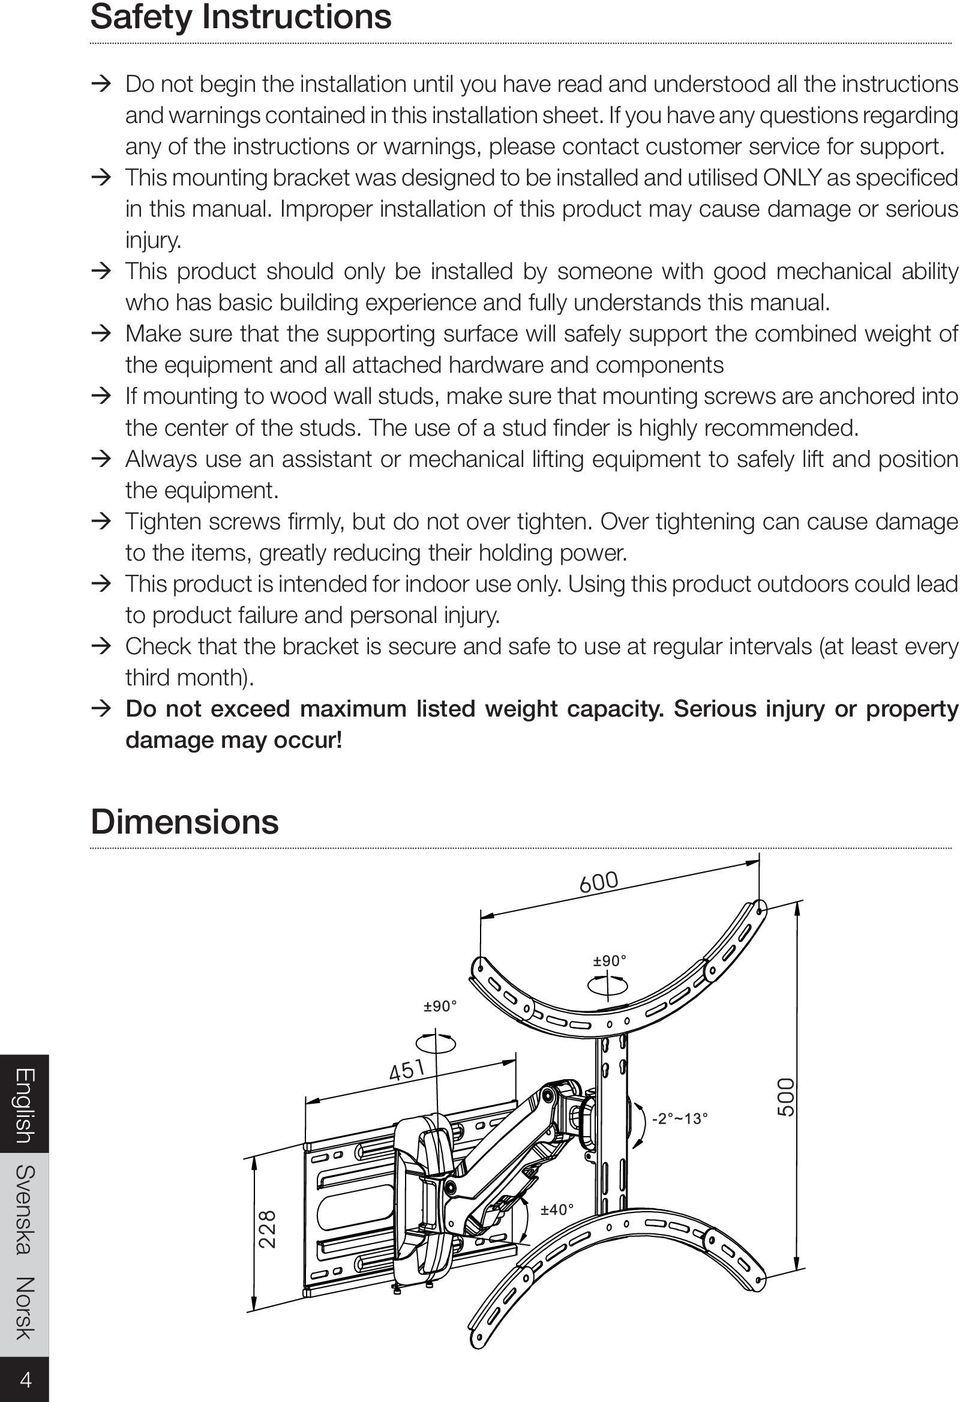 This mounting bracket was designed to be installed and utilised ONLY as specificed in this manual. Improper installation of this product may cause damage or serious injury.